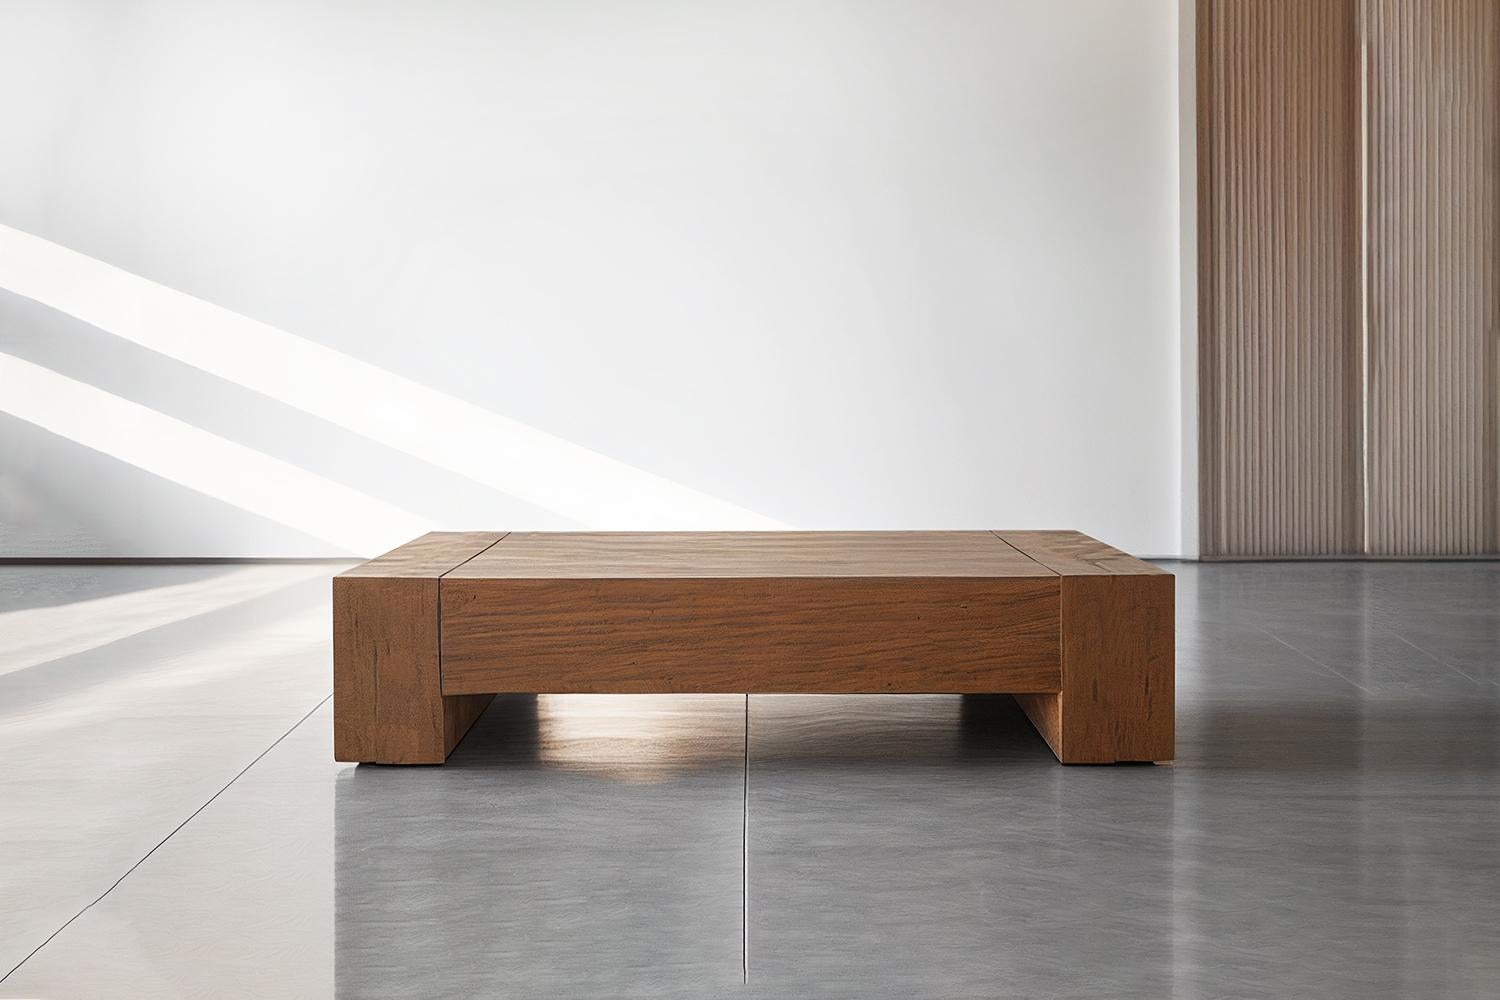 Elefante Collection by NONO Furniture 

A distinguished tribute to the architectural movements of Mexican Modernism and Brutalist design. The collection showcases three minimal furniture design pieces, including a versatile side table that doubles